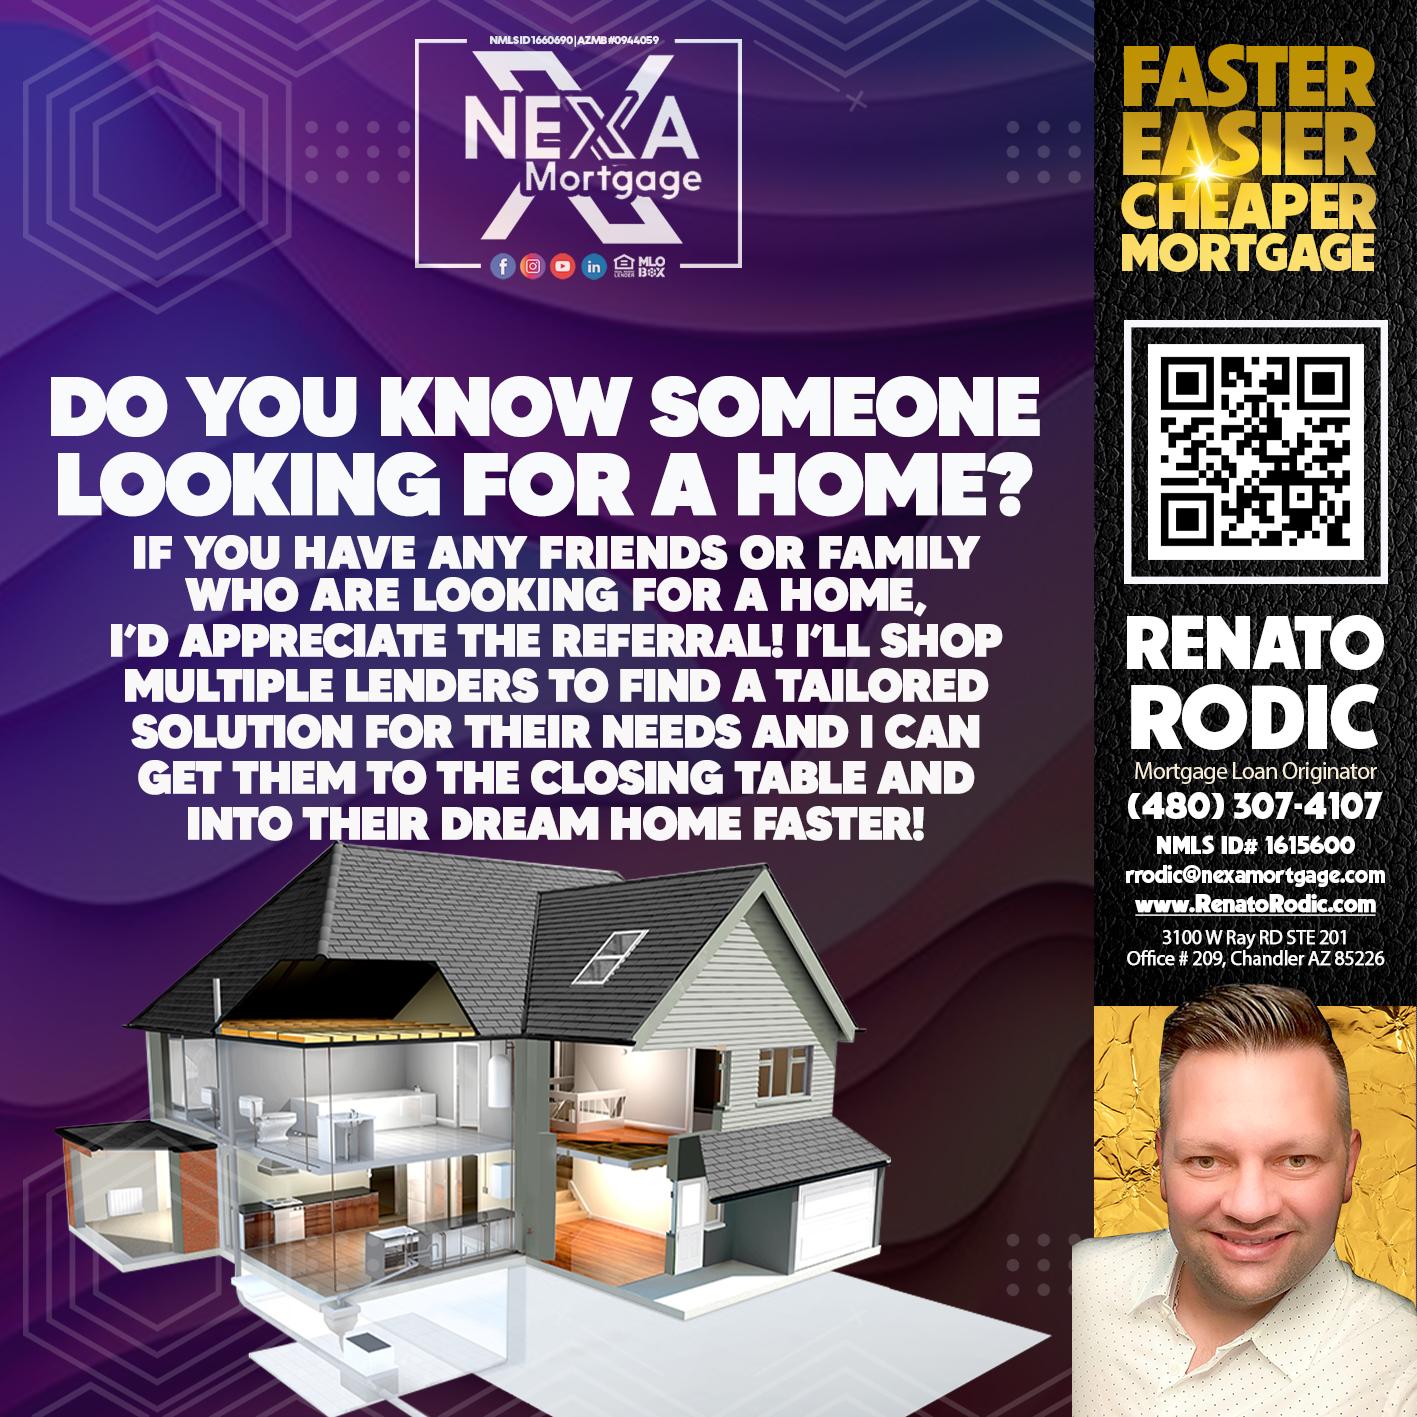 LOOKING FOR A HOME?